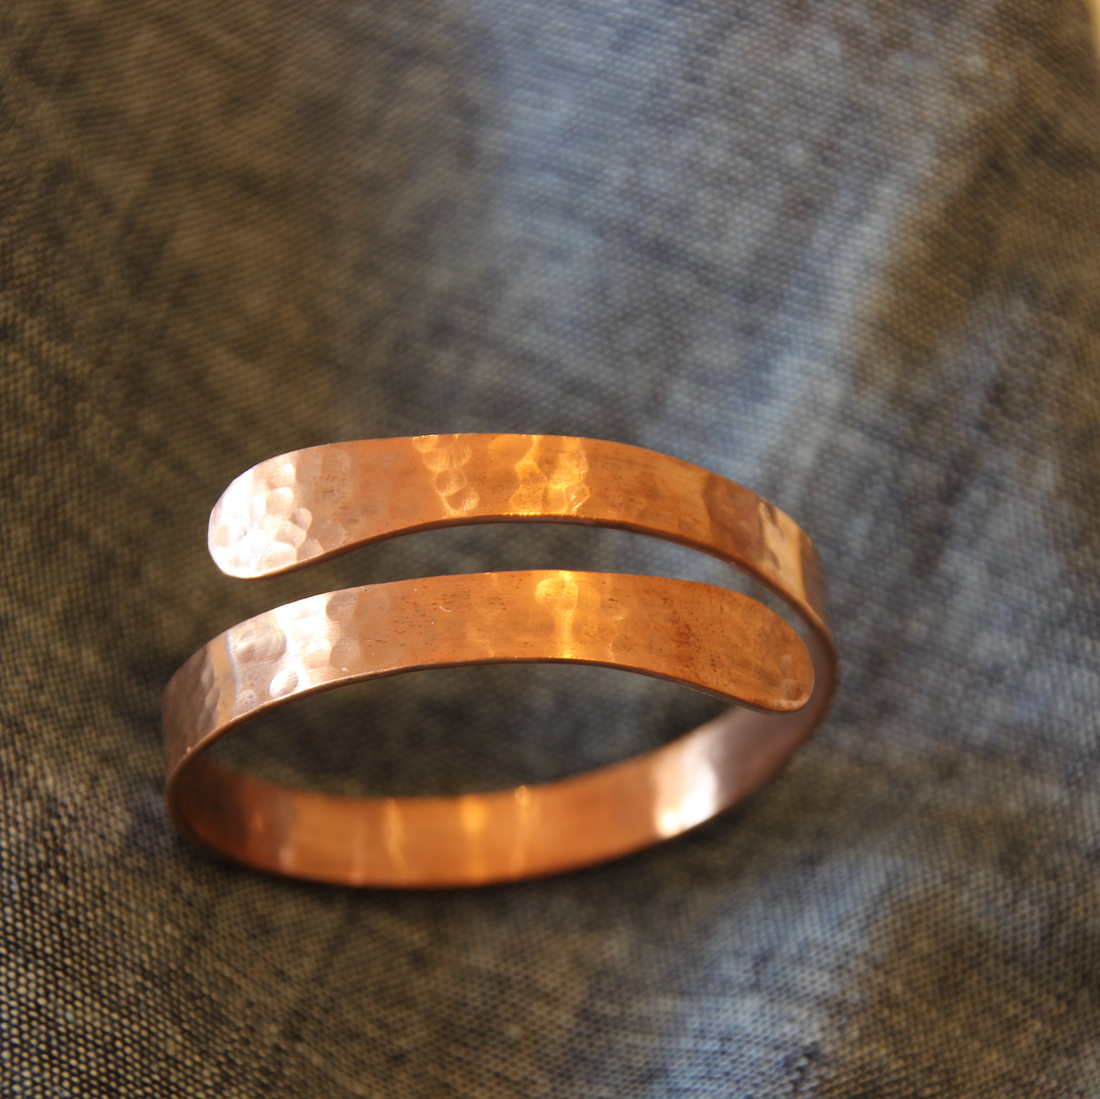 Table and Kitchen fair trade ethical sustainable fashion Copper Napkin Rings- Set of Four conscious purchase Basha